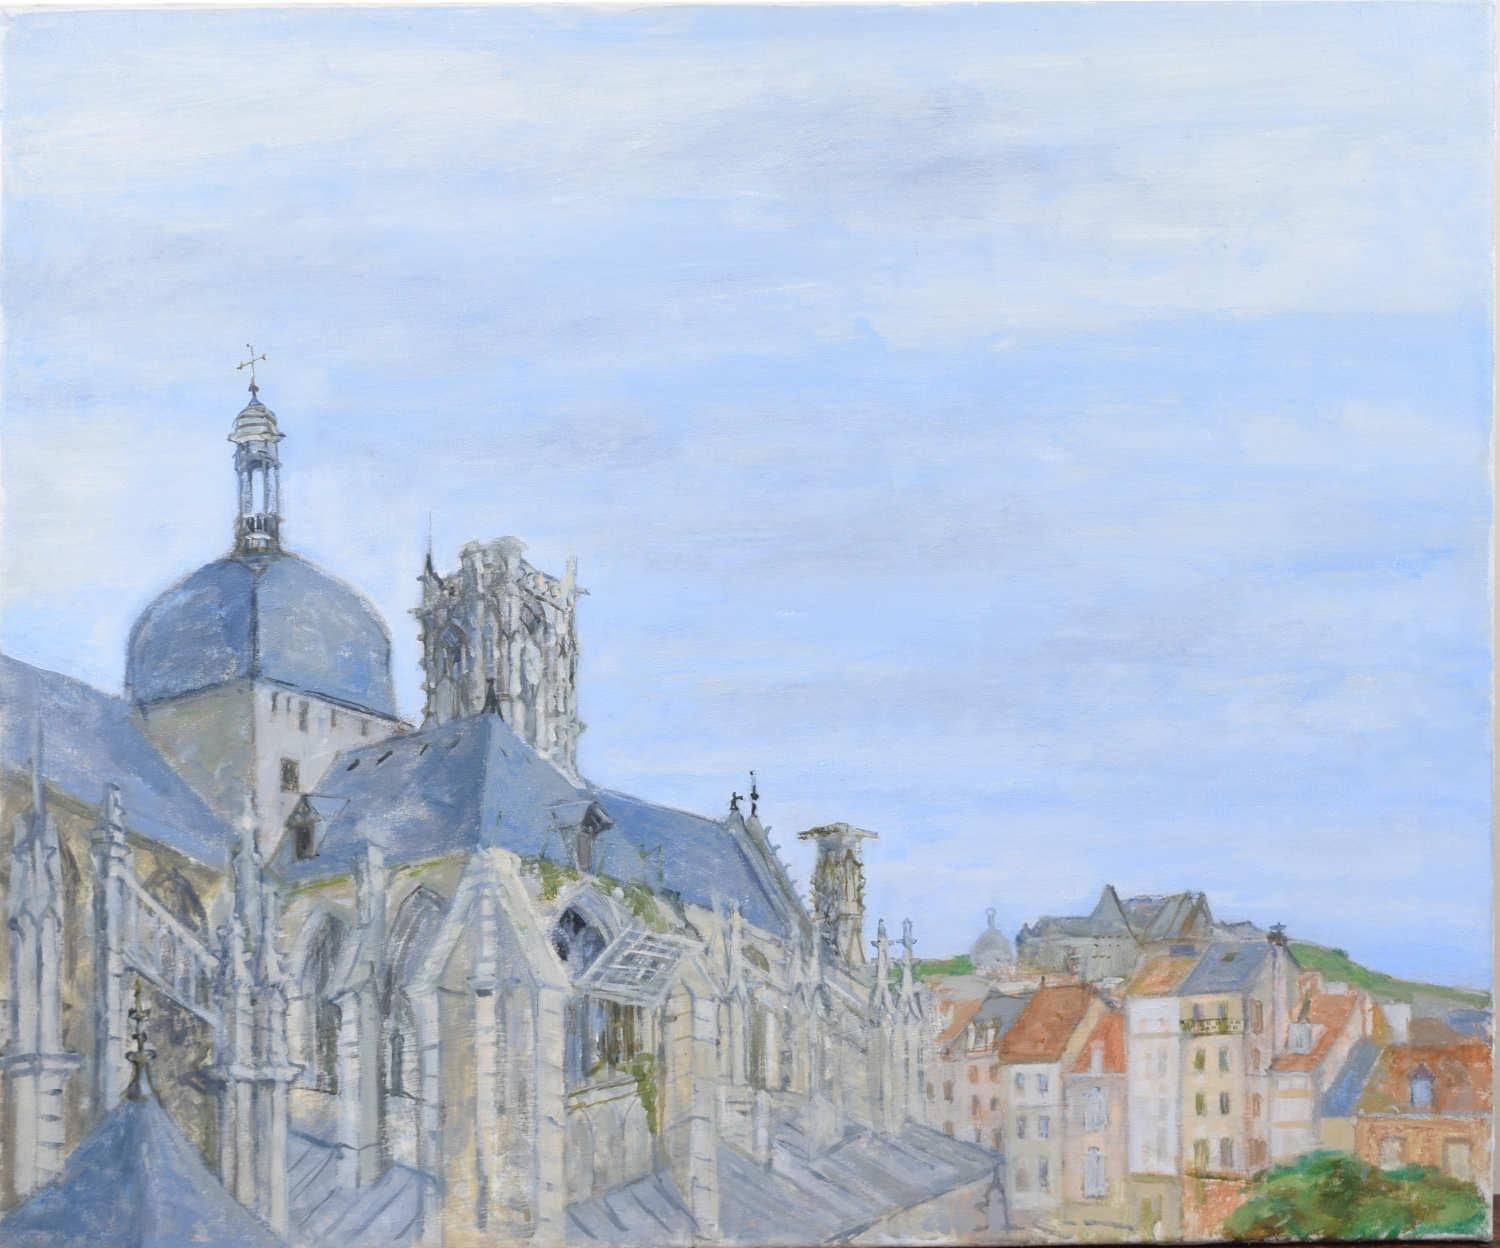 Dieppe, France Saint-Jacques' Church painting by Richard Beer